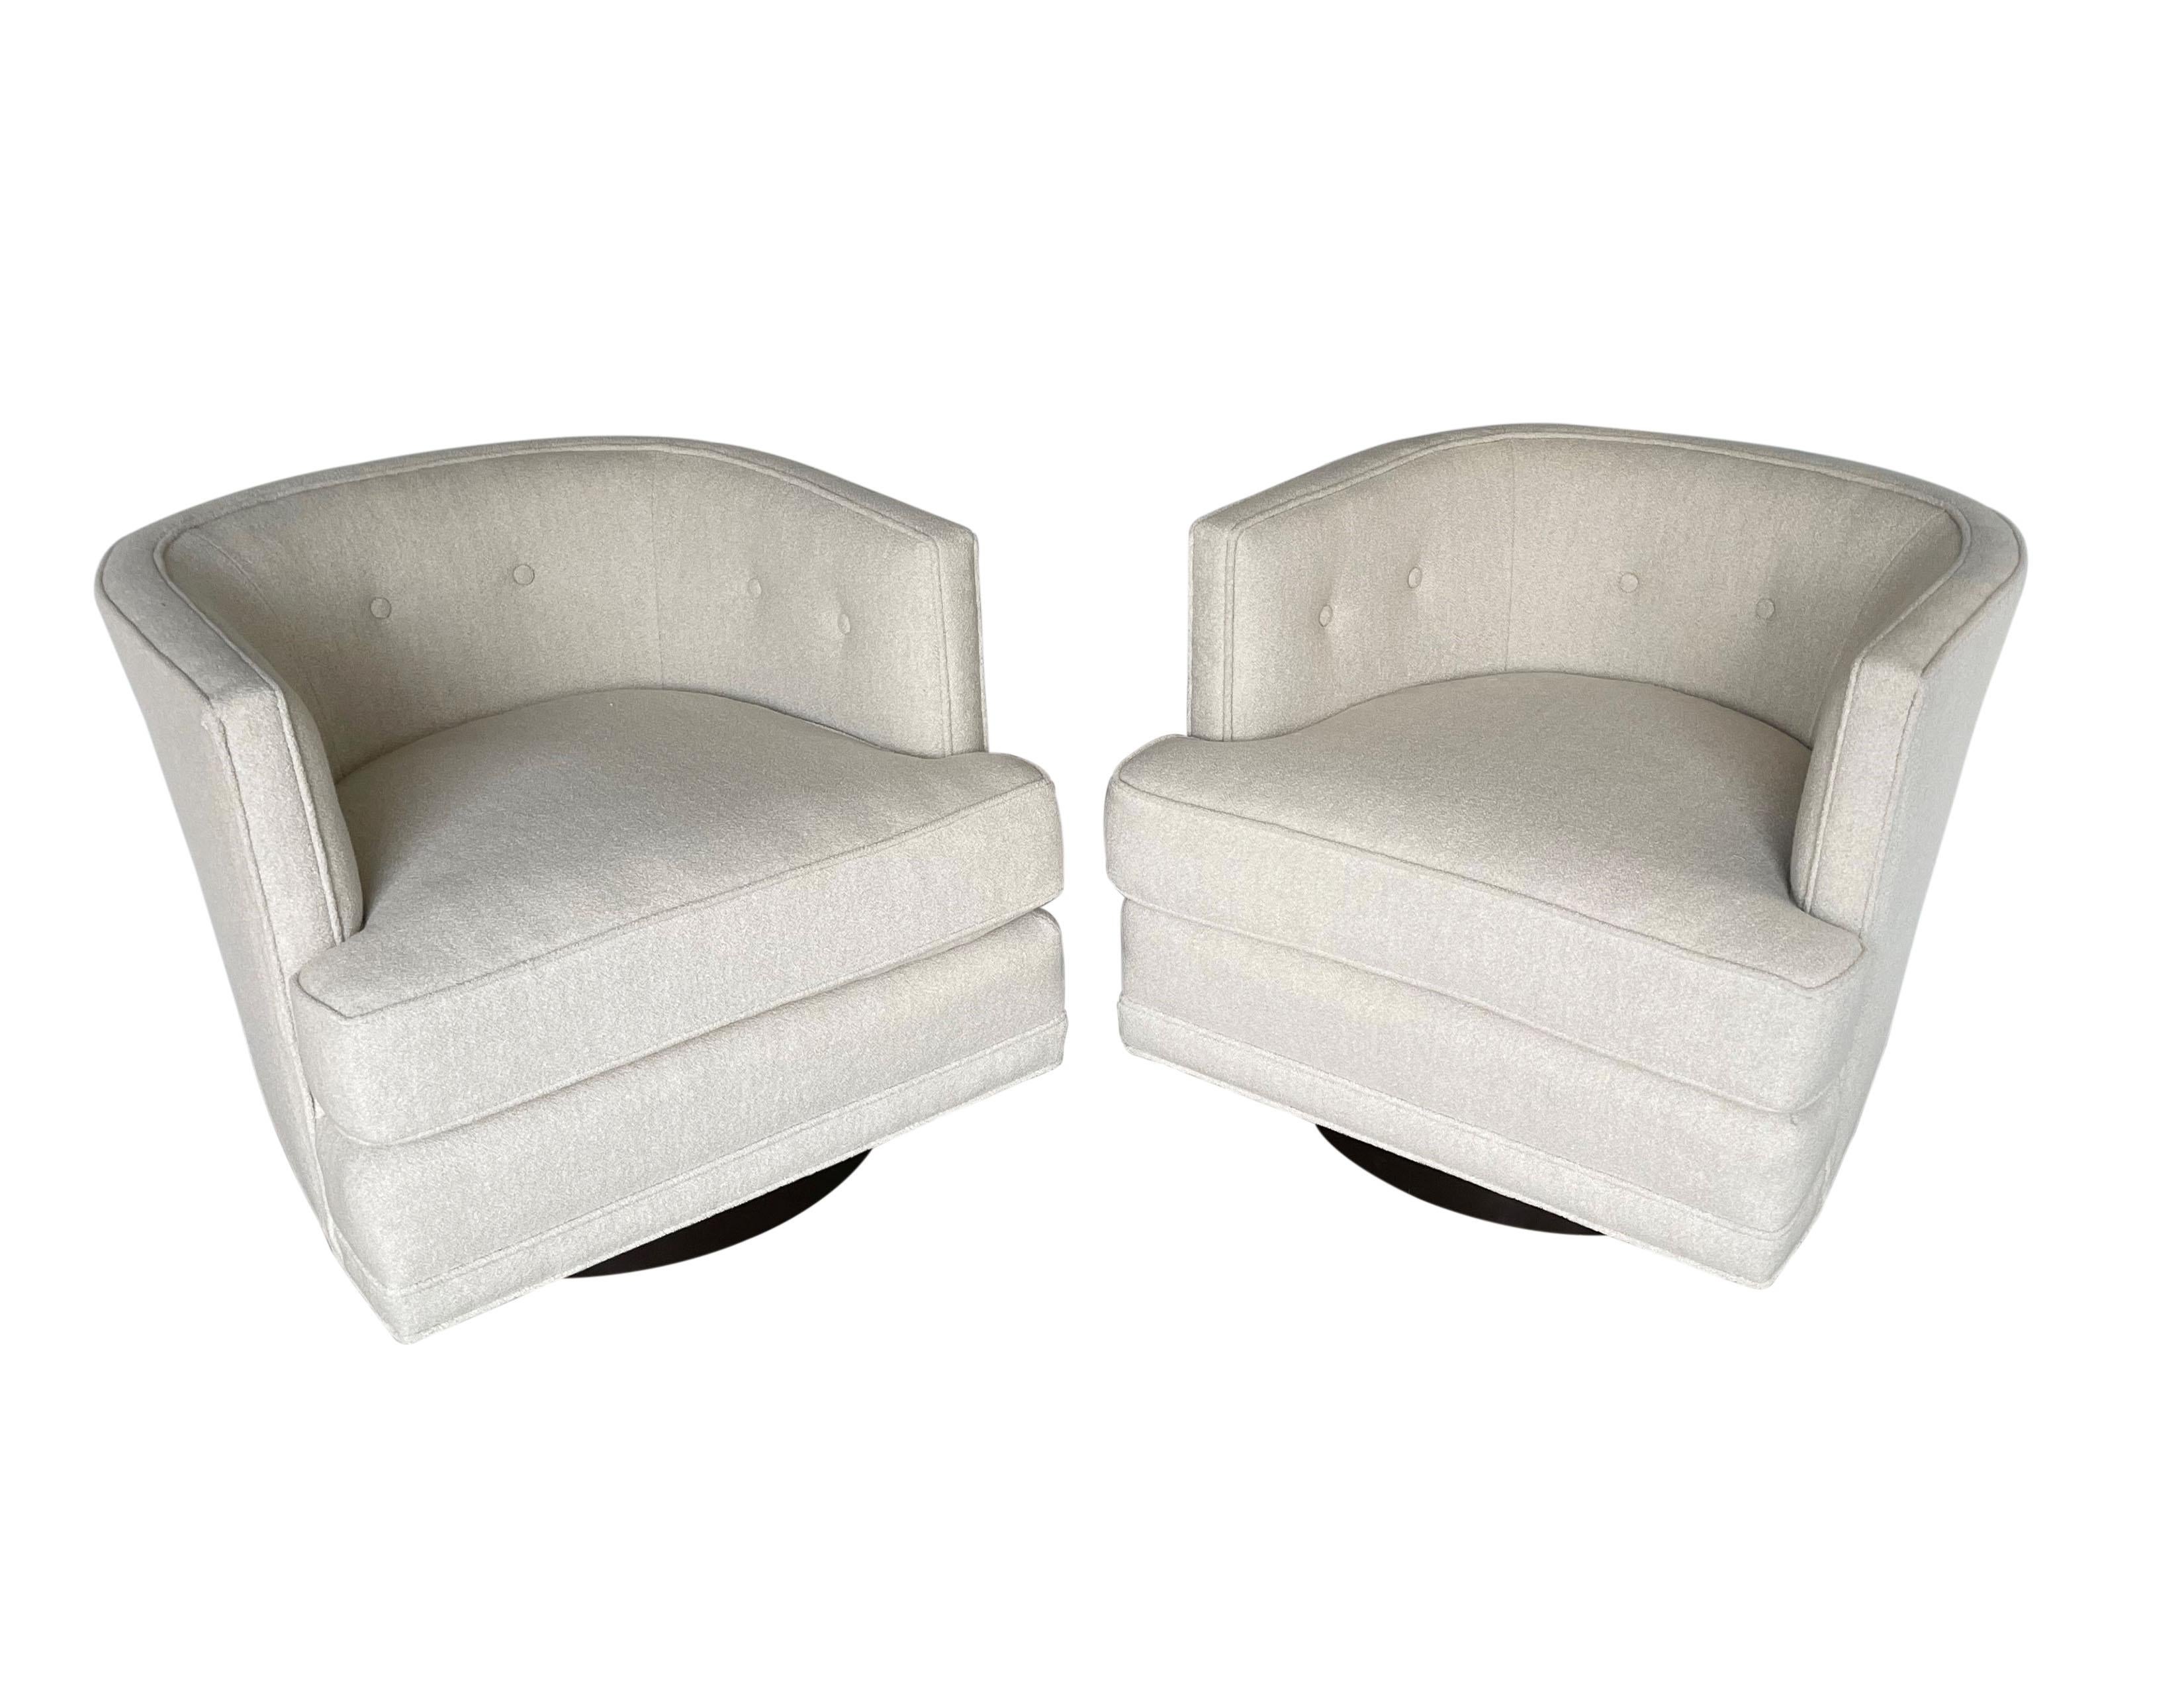 Retro glamour meets modern comfort pair of swivel lounge chairs attributed to Harvey Probber. Pristinely tailored chairs feature a barreled tufted back creating a cozy embrace, oversized detached plush cushion seat and flat front aprons, freshly